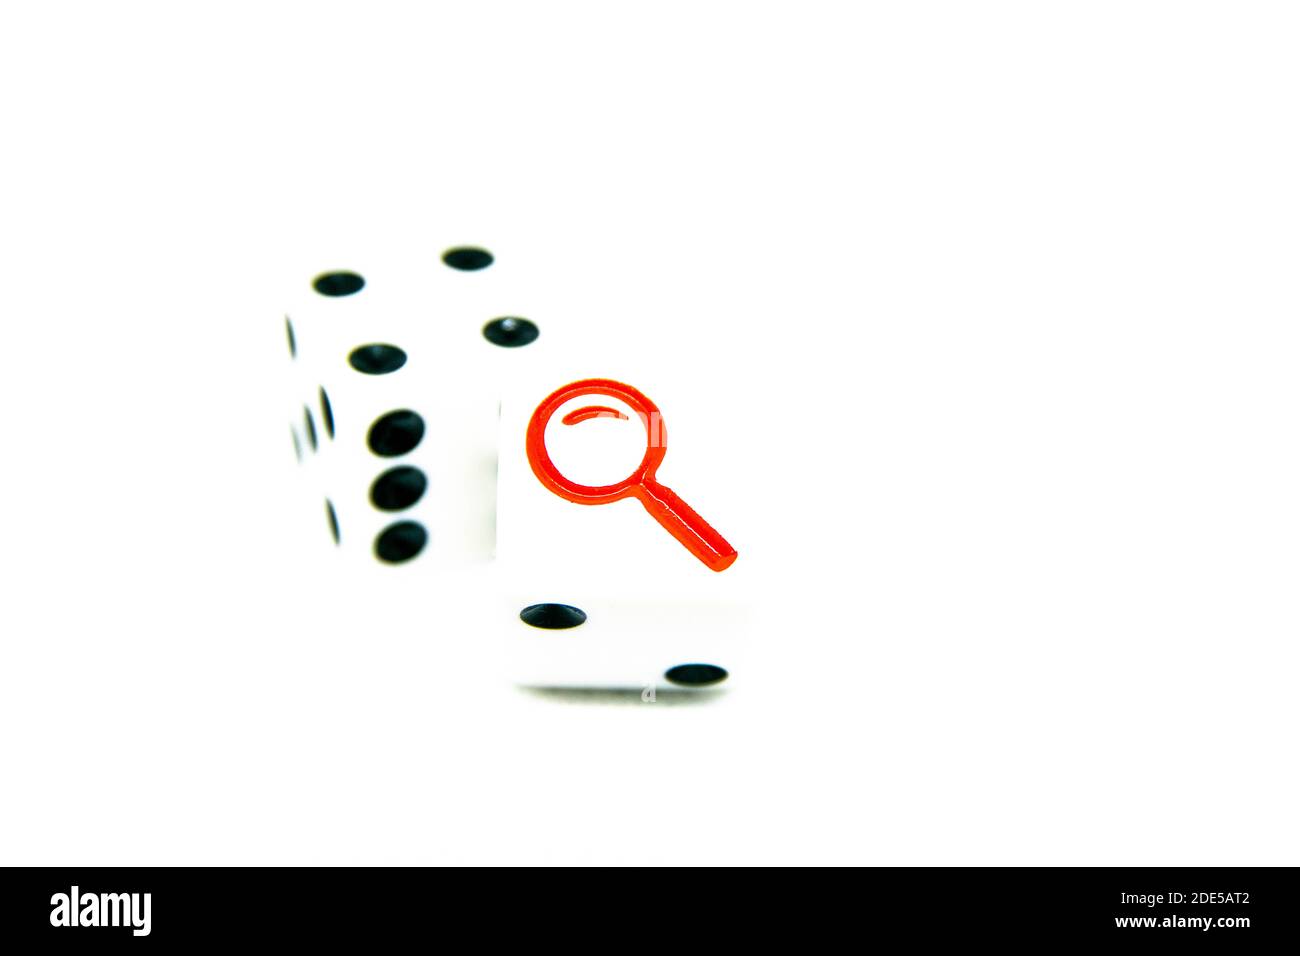 Pair of die with one showing black dots and one showing a red detectives magnifying looking glass. Isolated. Concept for mystery, strategy, luck, chan Stock Photo